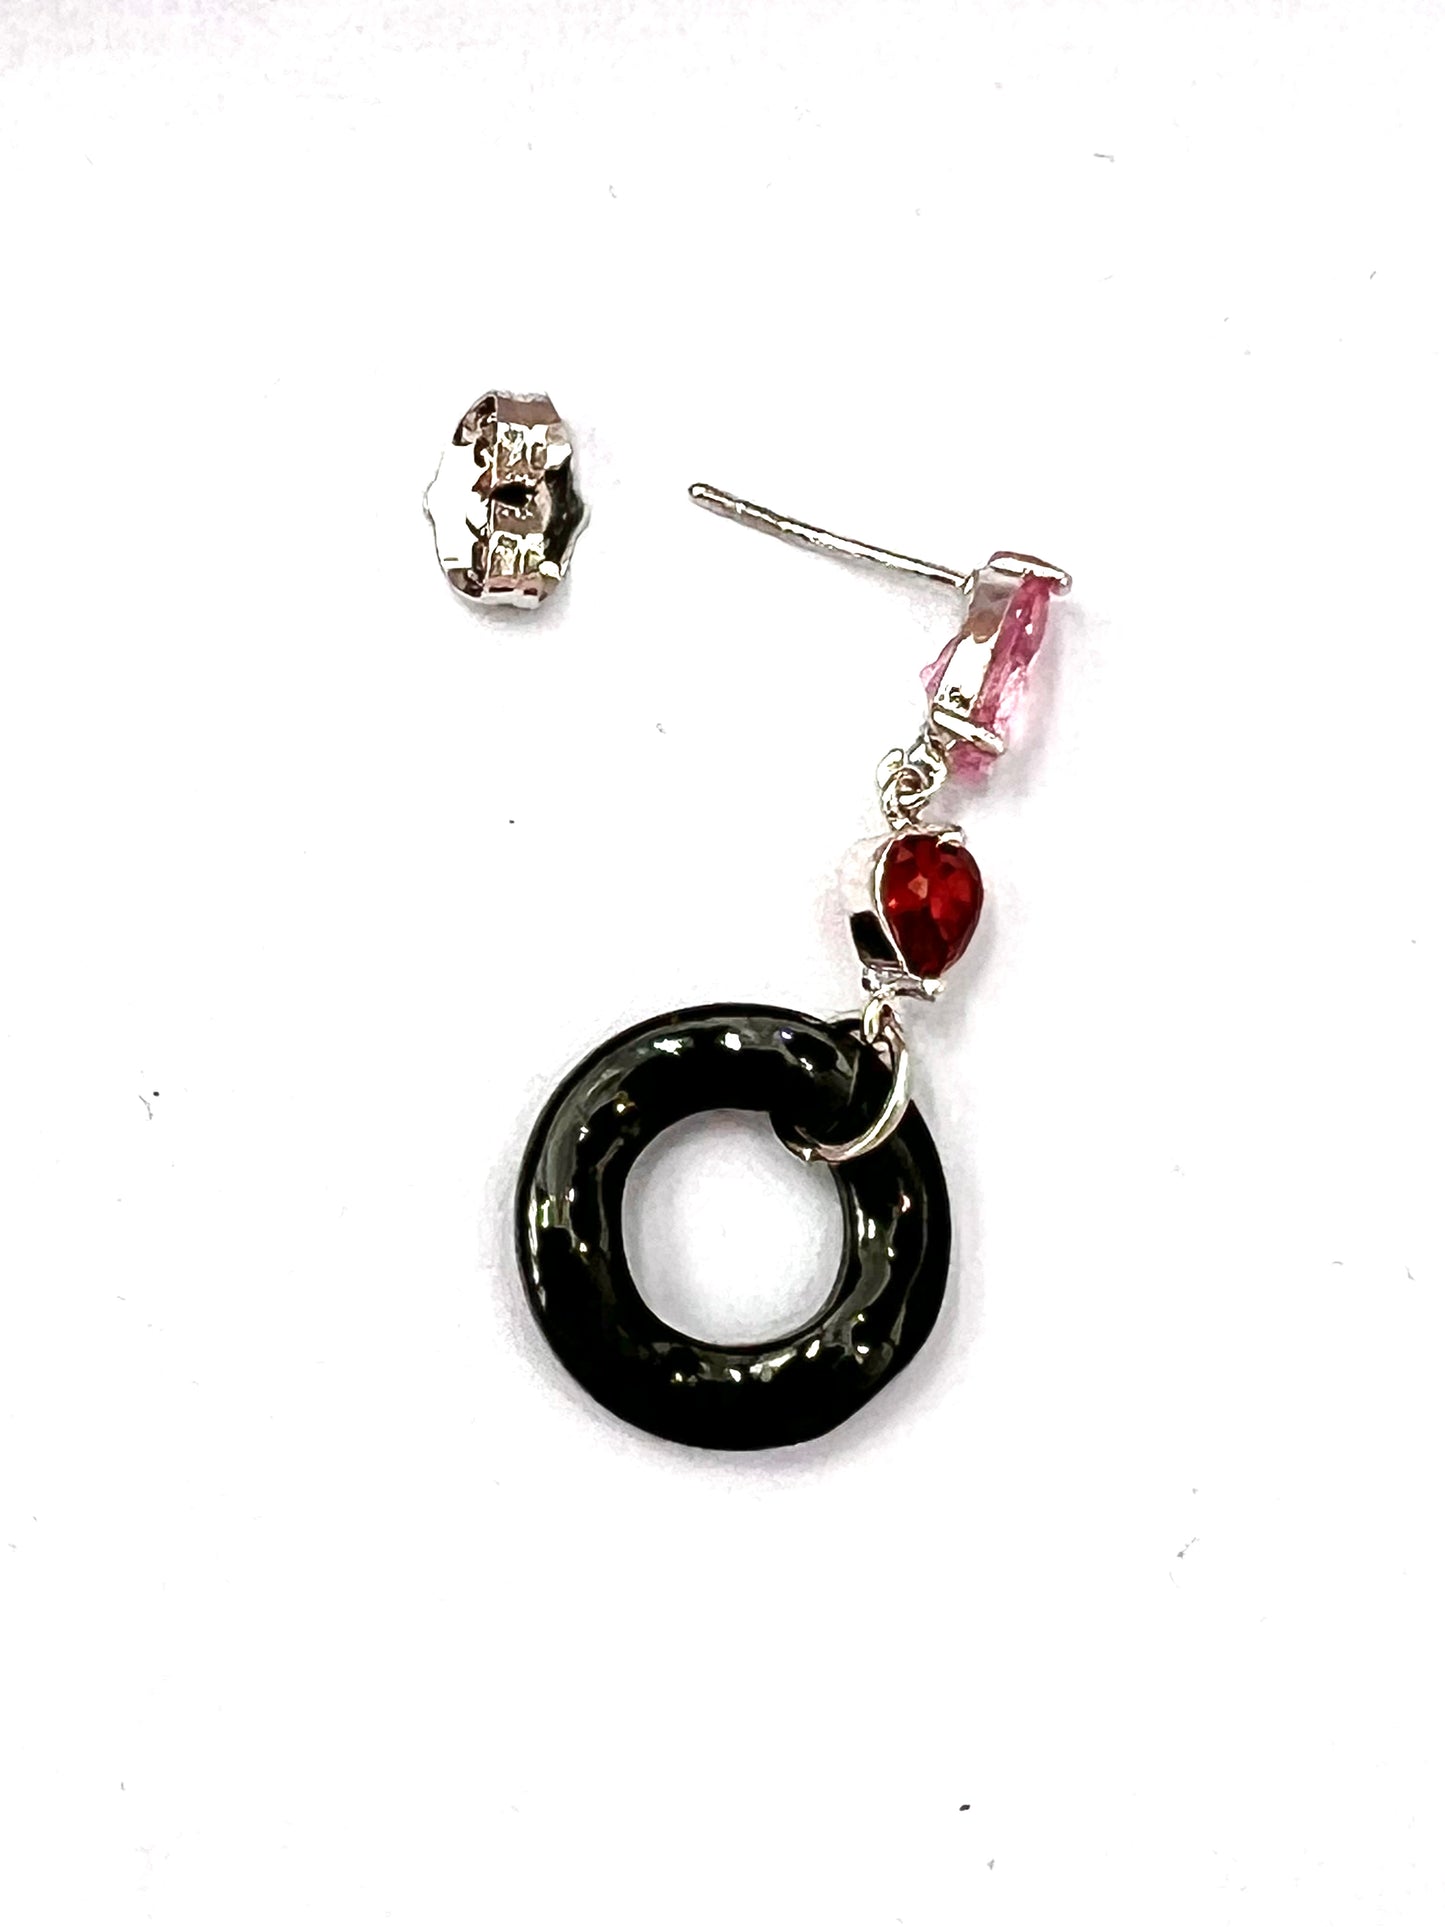 Vibrant Elegance: Black, Red, and Pink Silver Earrings and Pendant Set